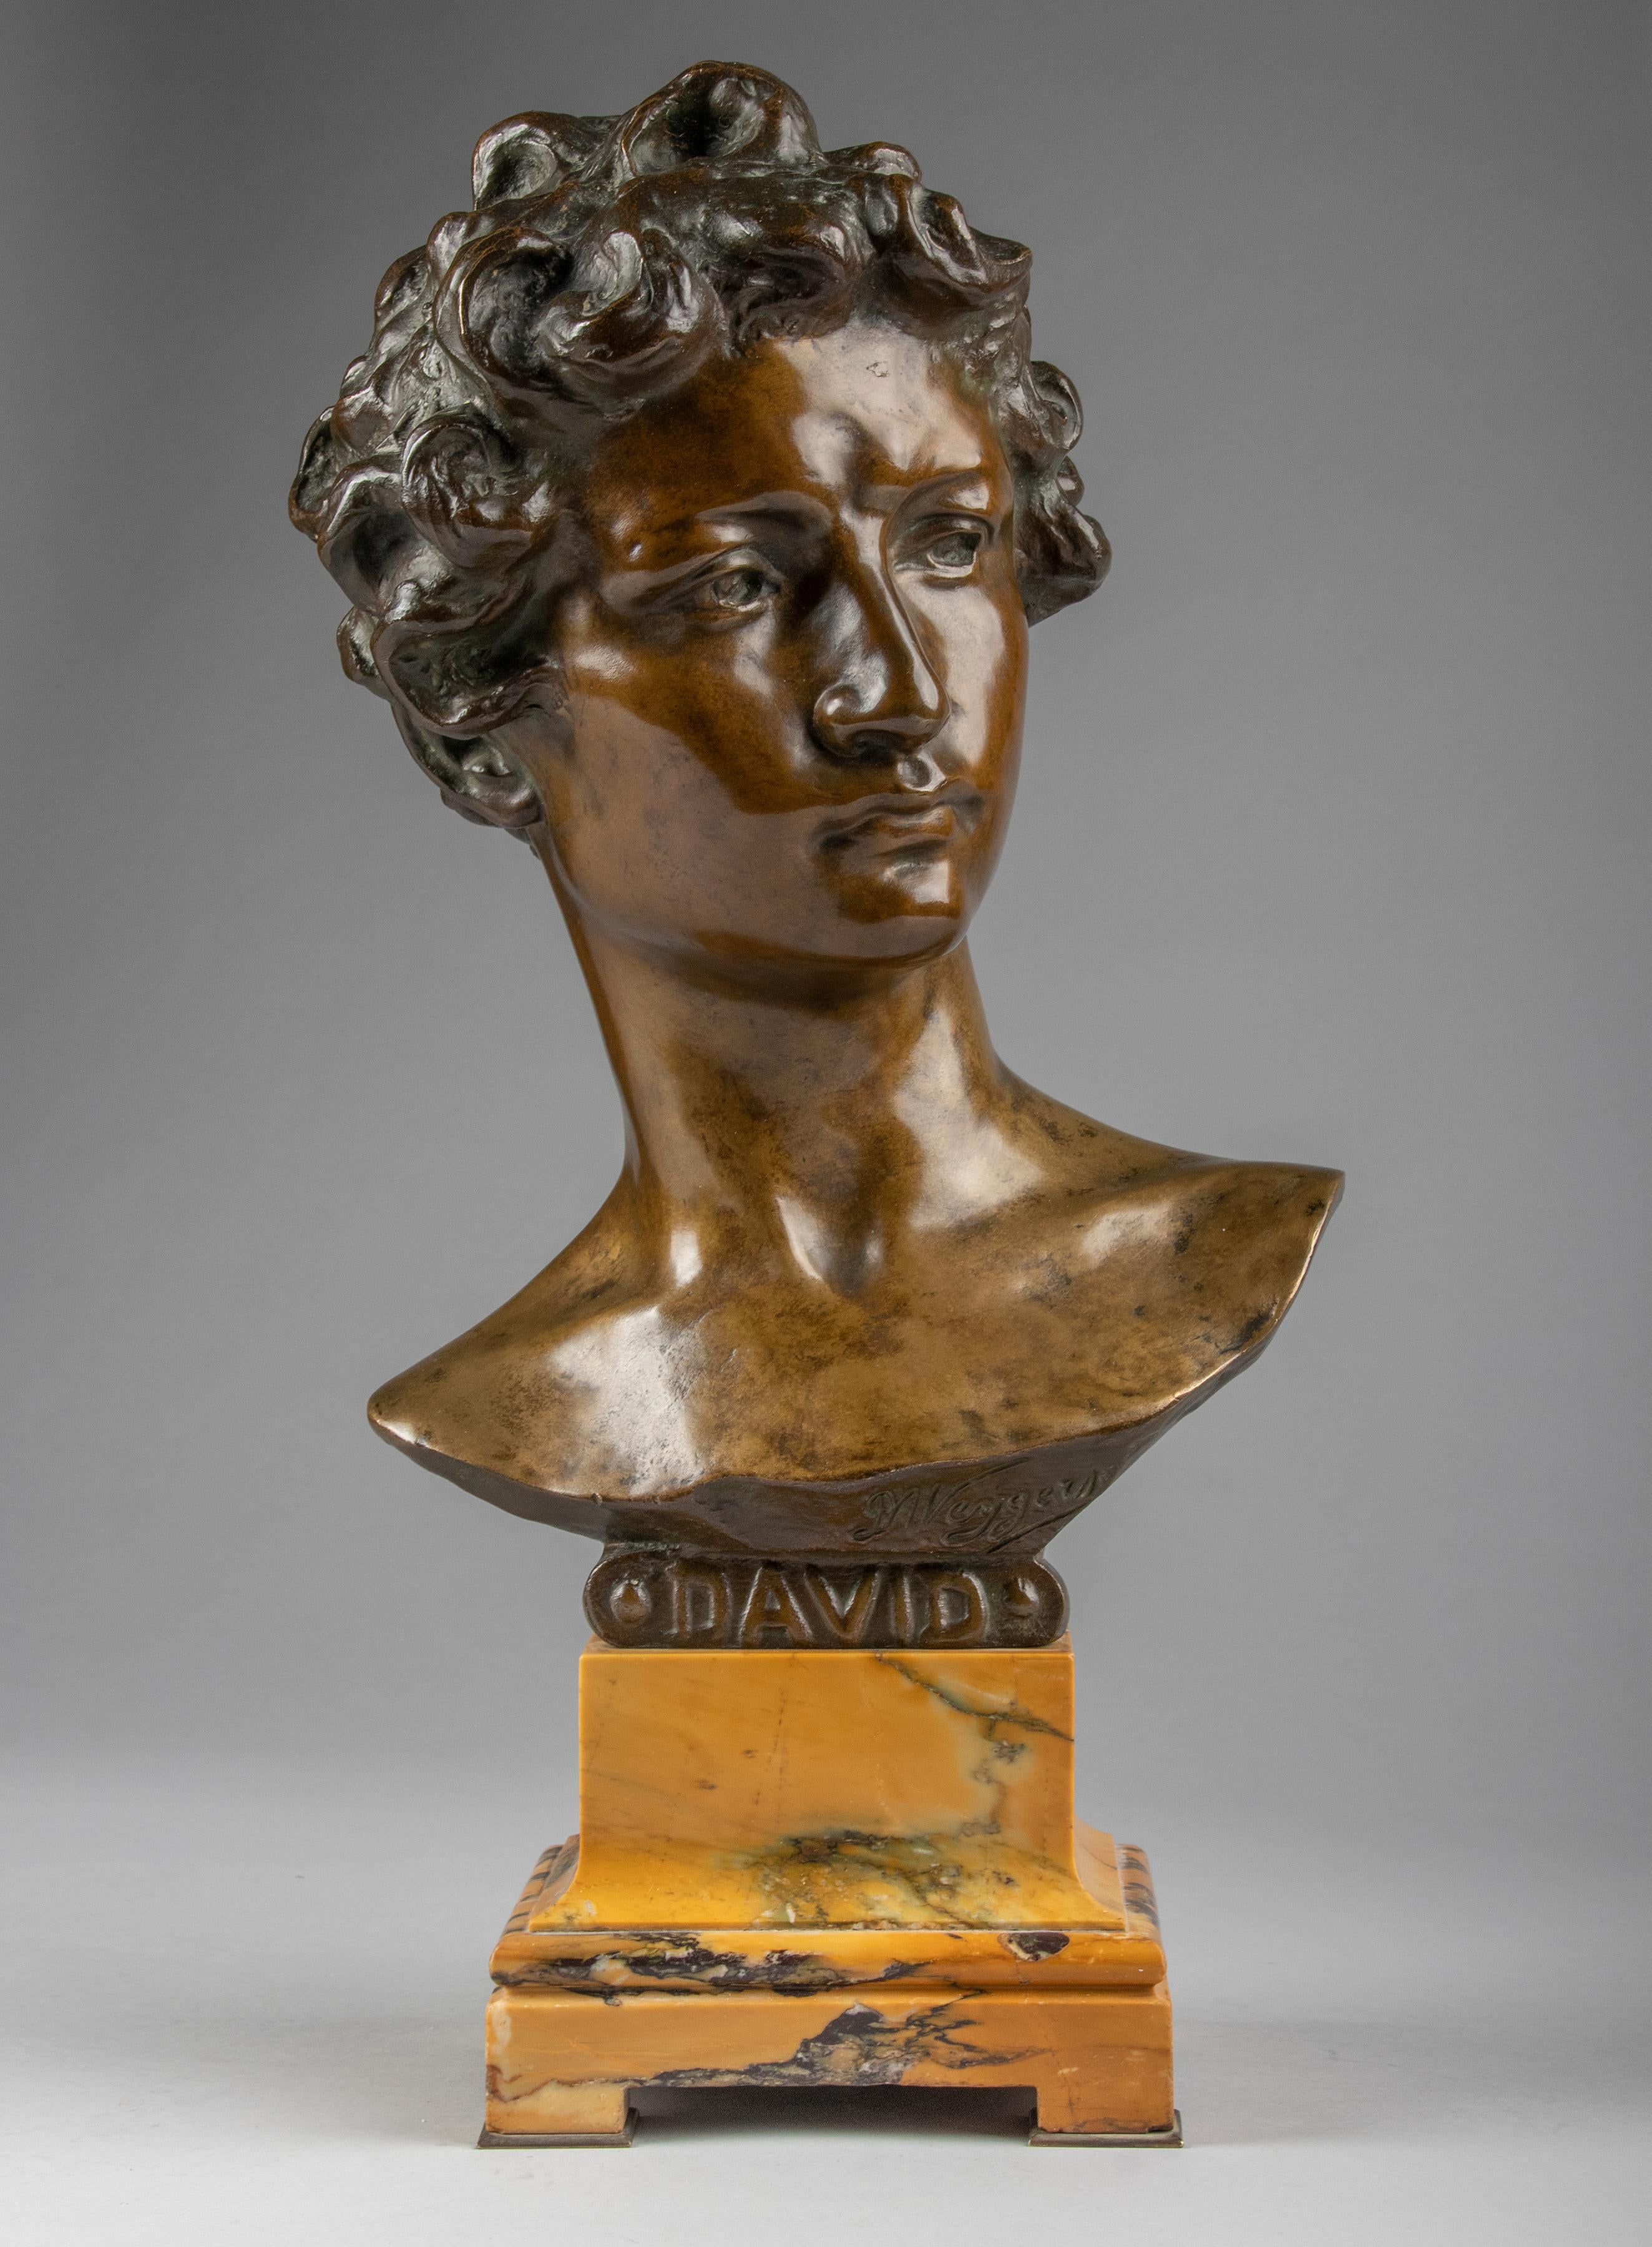 An antique brown patinated bronze bust depicting the mythical David after Michelangelo's masterpiece displayed in the Museum of Florence. The dark brown patinated bronze bust has a sensitively modeled face. The bust is mounted on a Siena marble